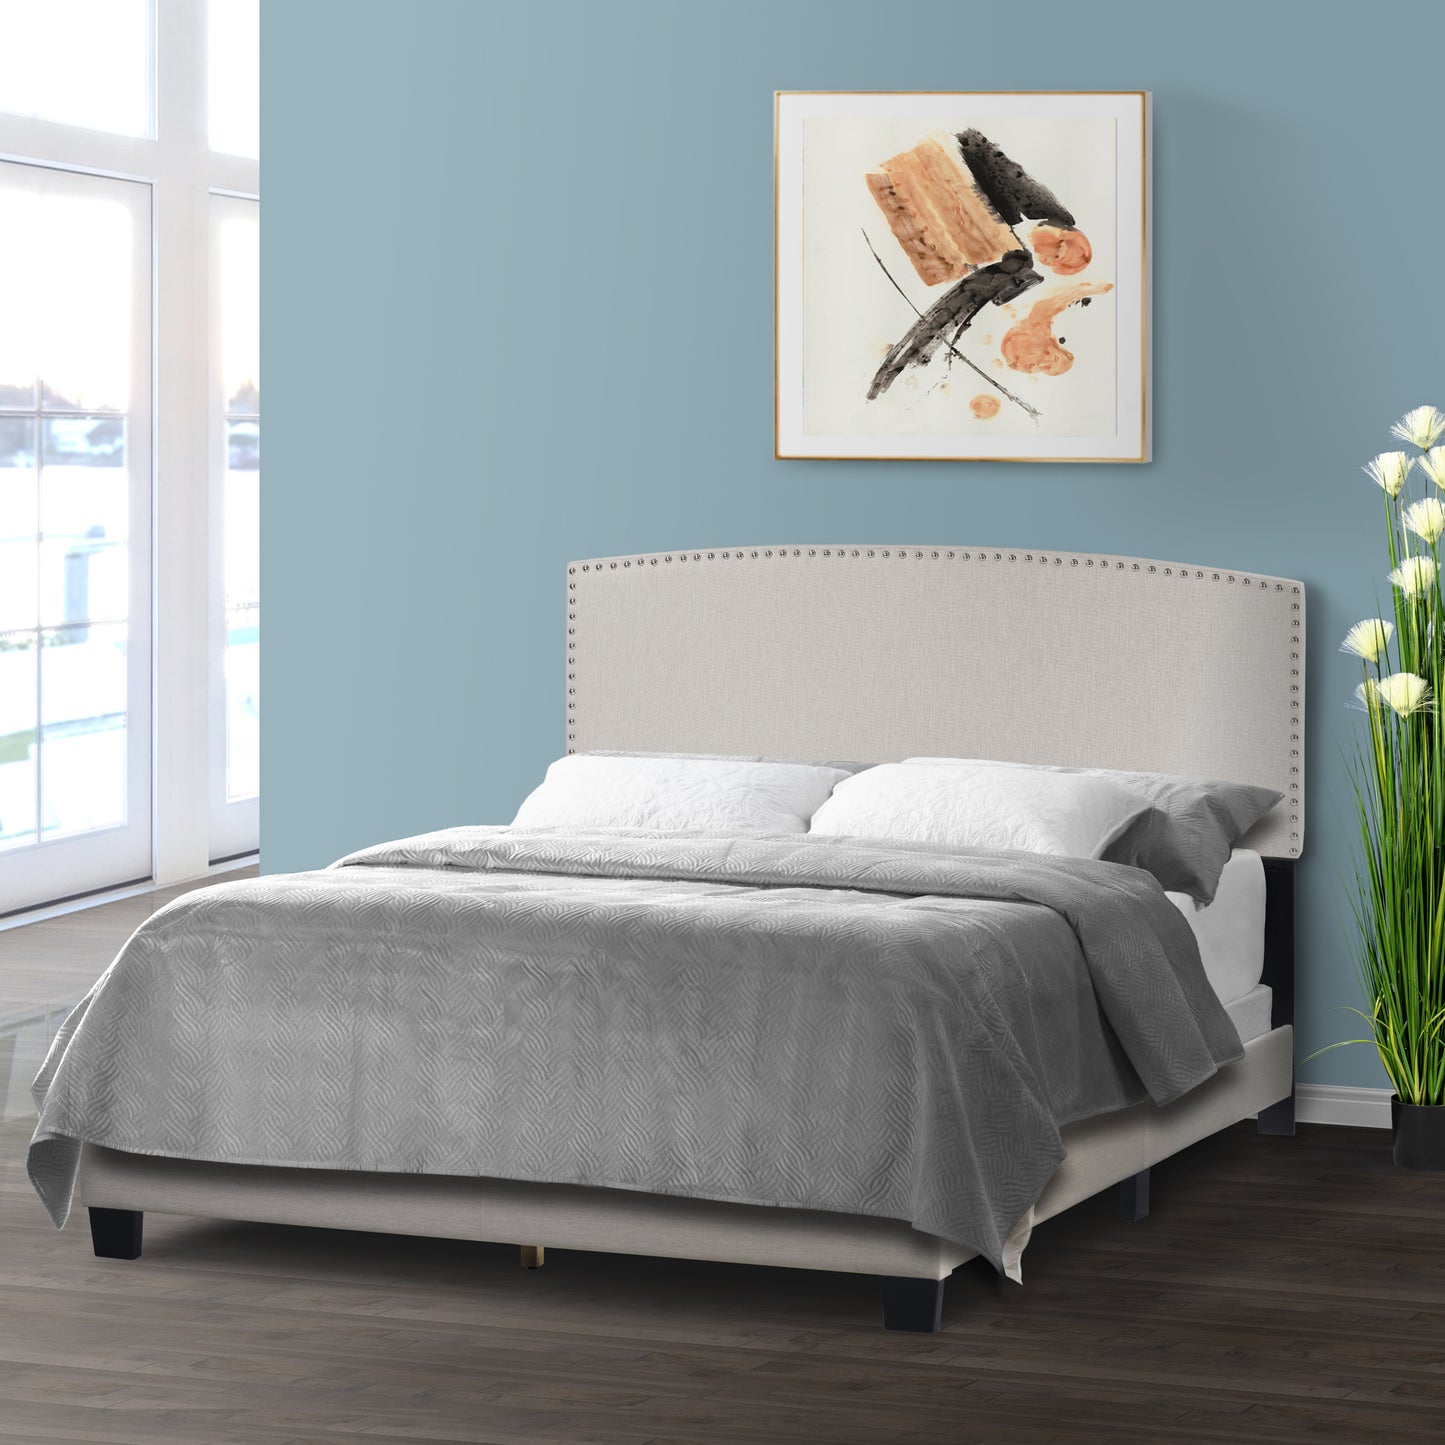 Ausca Beige Fabric Queen Bed with Nail Head Trim